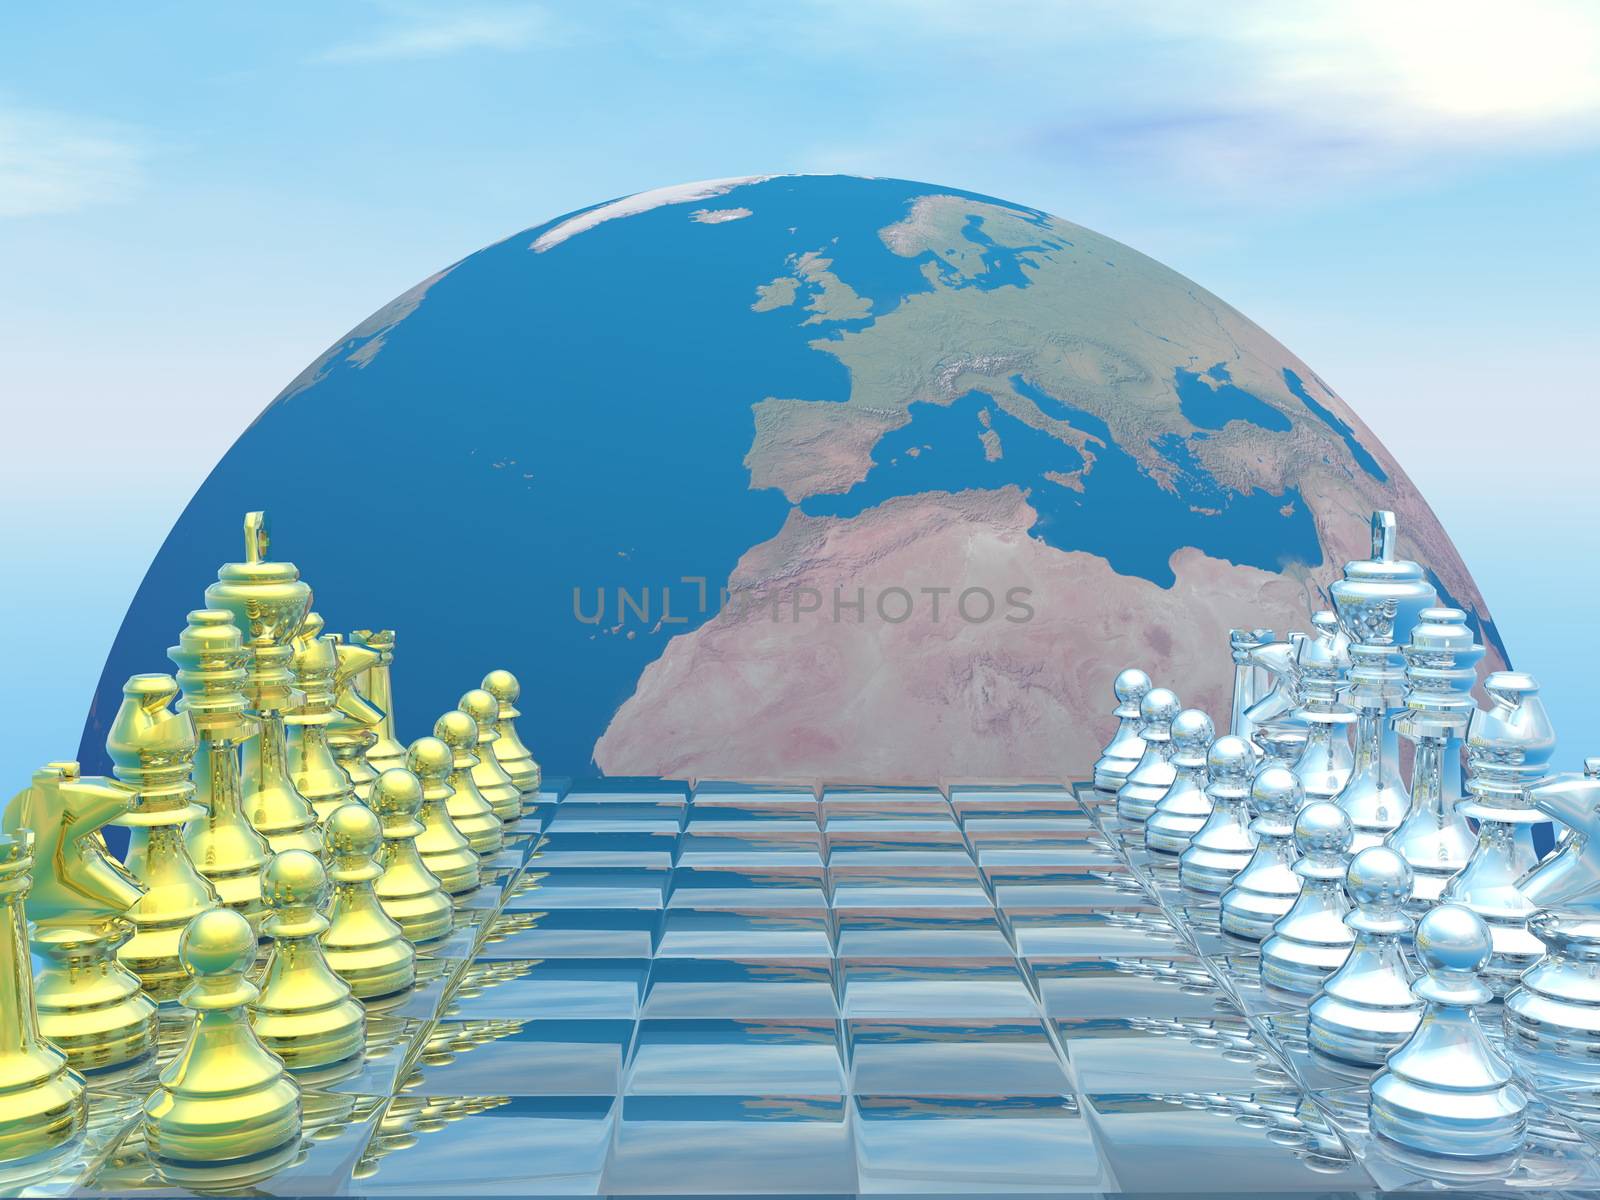 Chessboard with earth planet and blue sky - 3D render